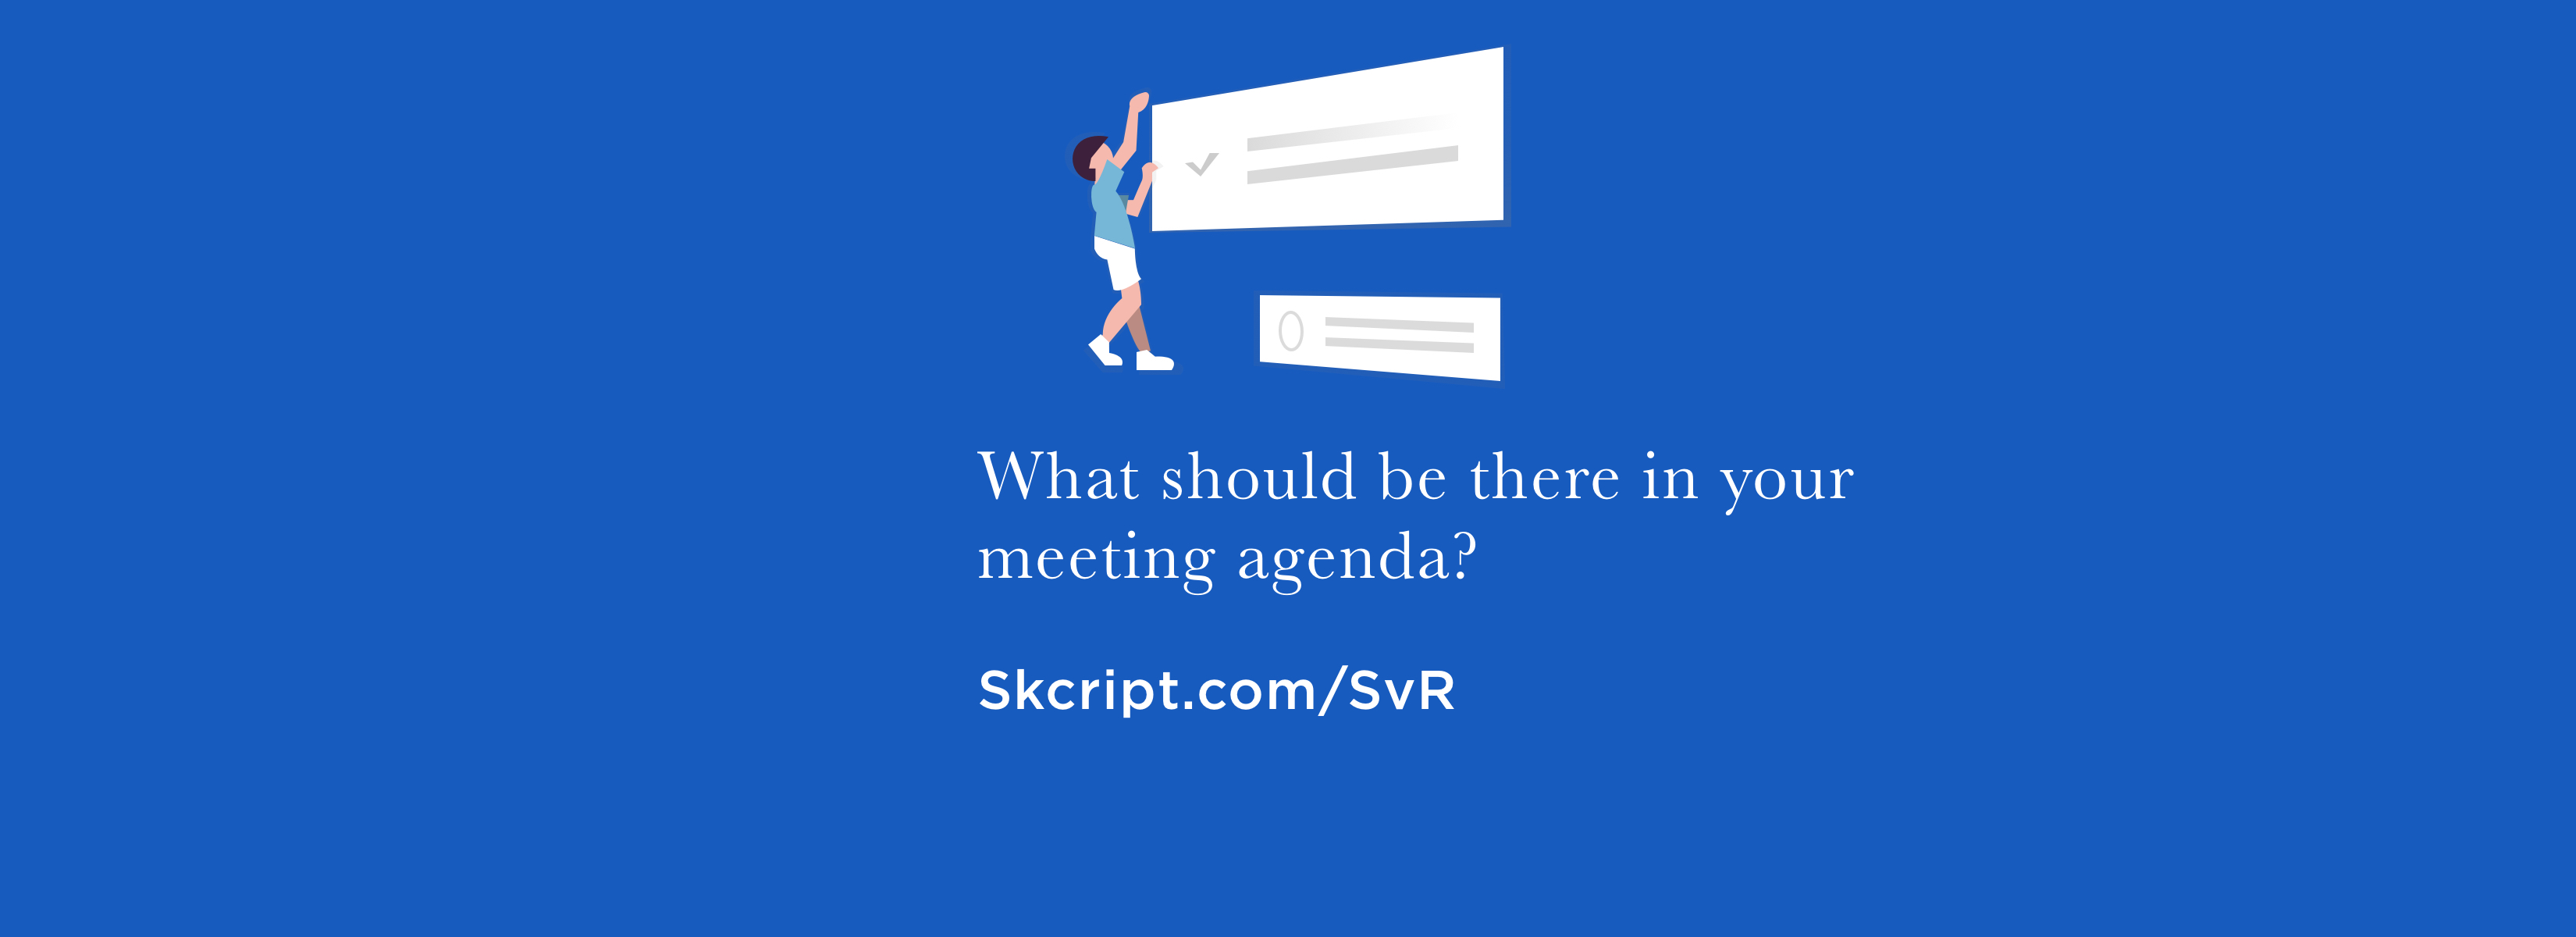 What should go into your meeting agenda?